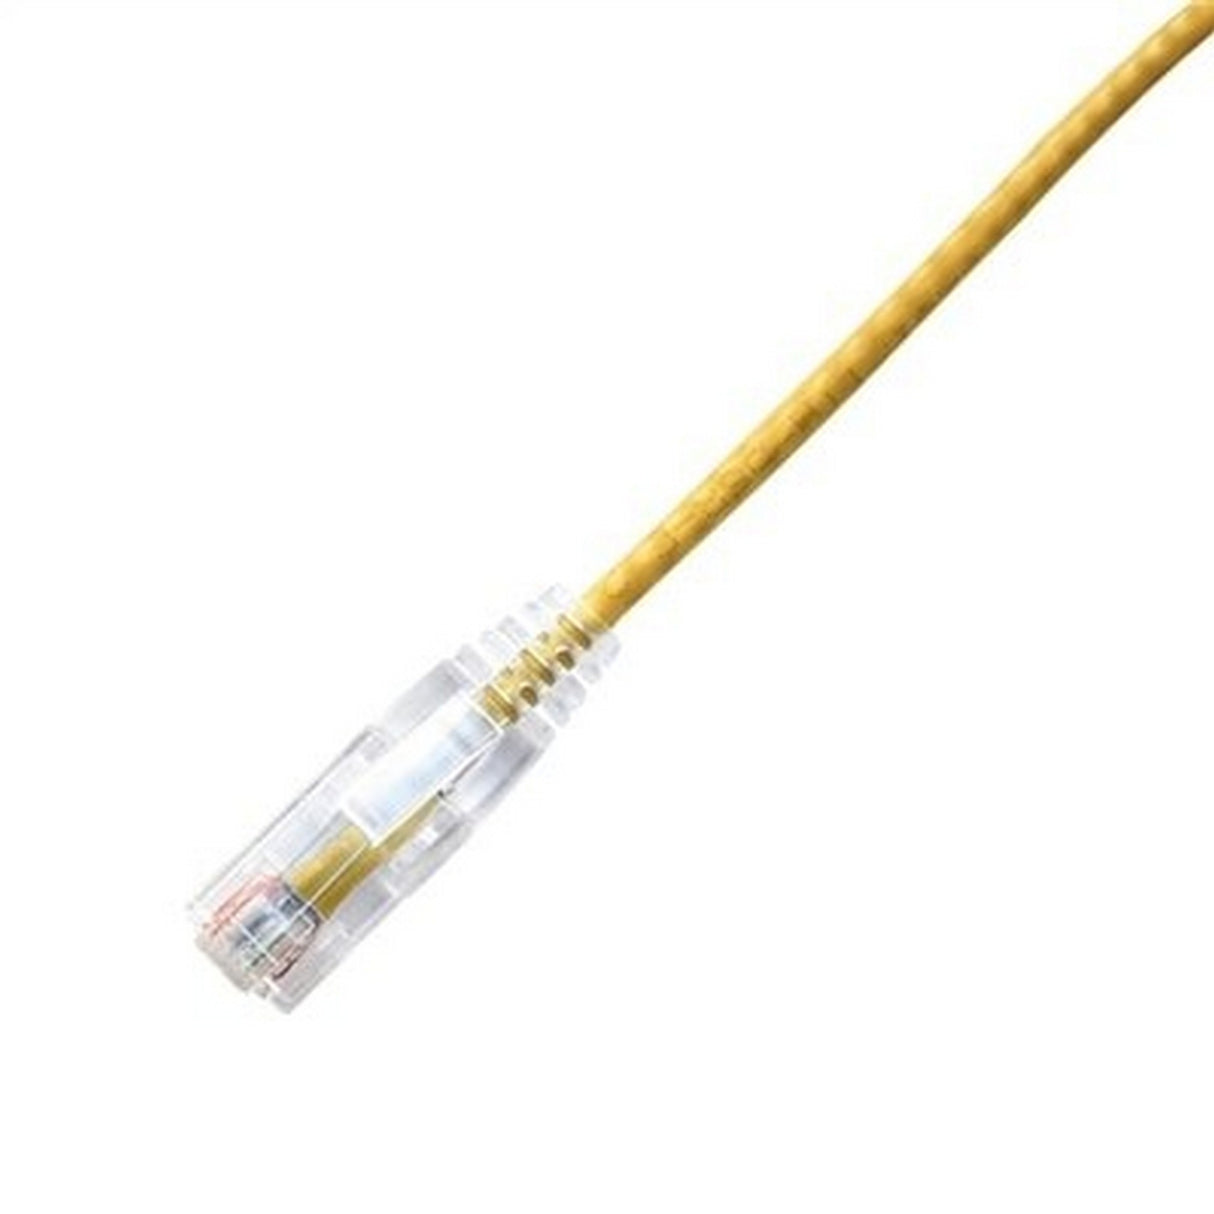 LYNN CPCS-AYE-010F CHOICE Slim 28AWG CAT6A Ethernet Patch Cable, 10-Foot, Yellow